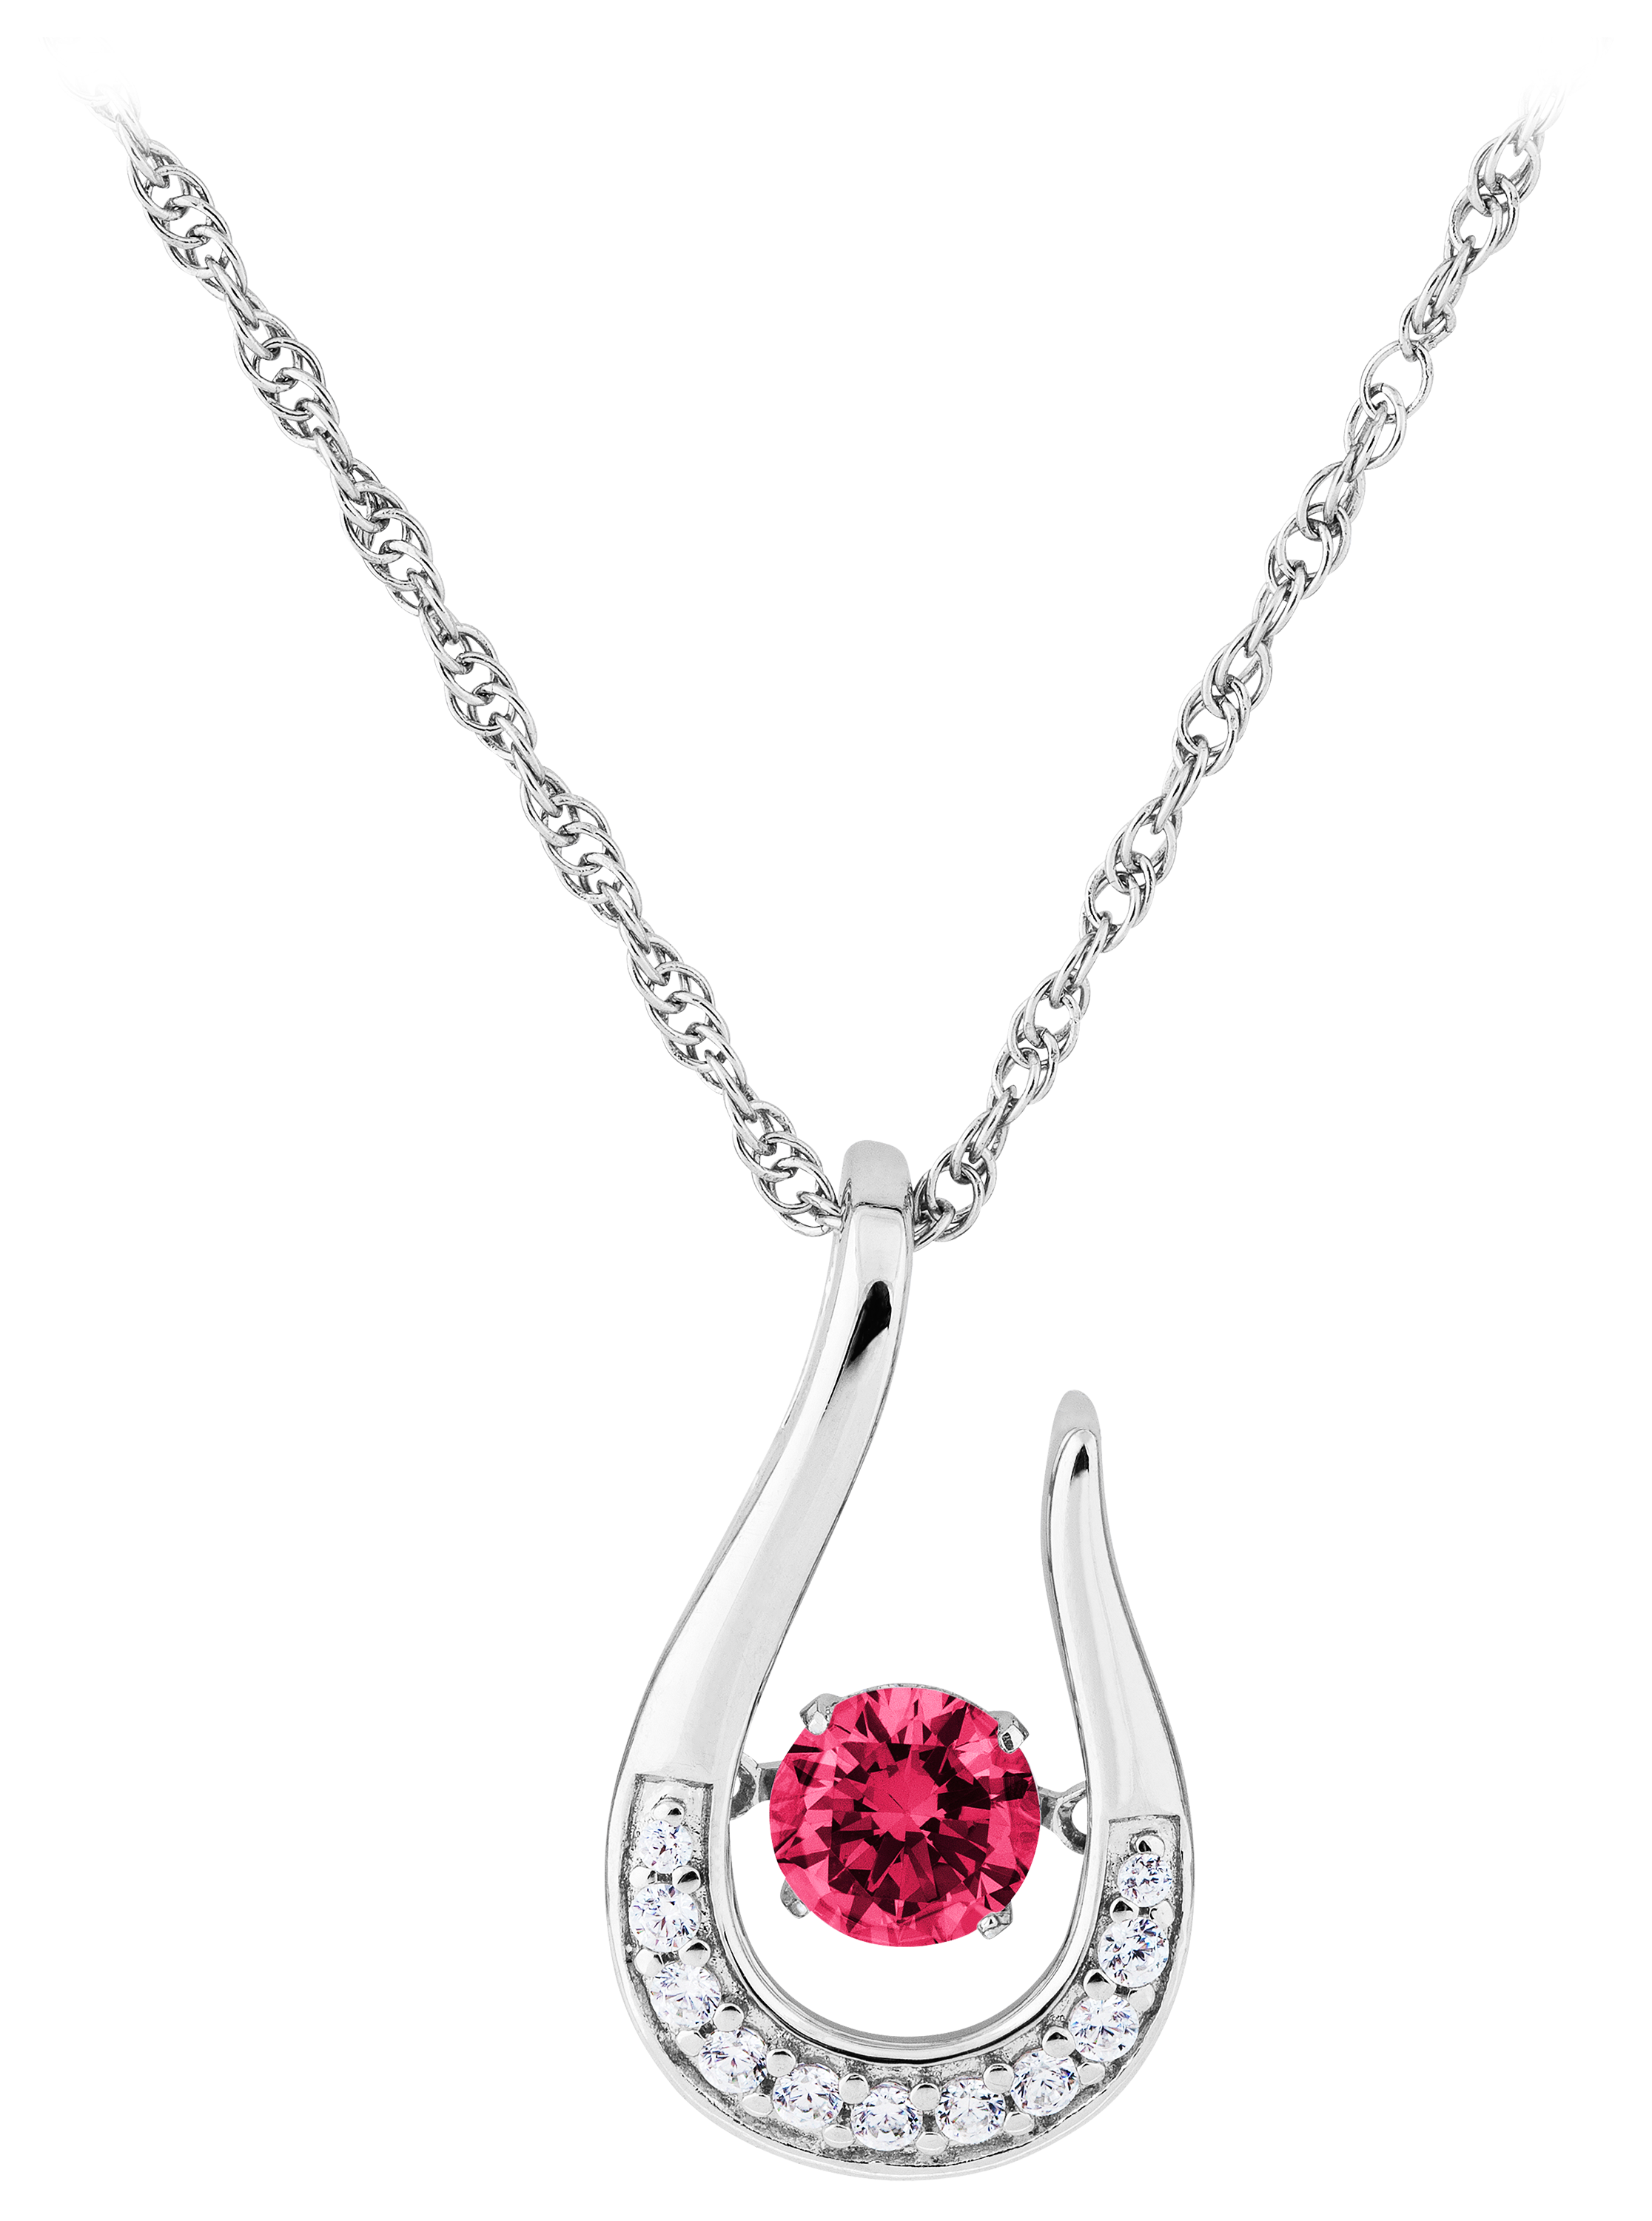 TR Jewelry Concepts Silver Elegance Twinkle Birthstone Pendant Sterling Silver Necklace - Ruby